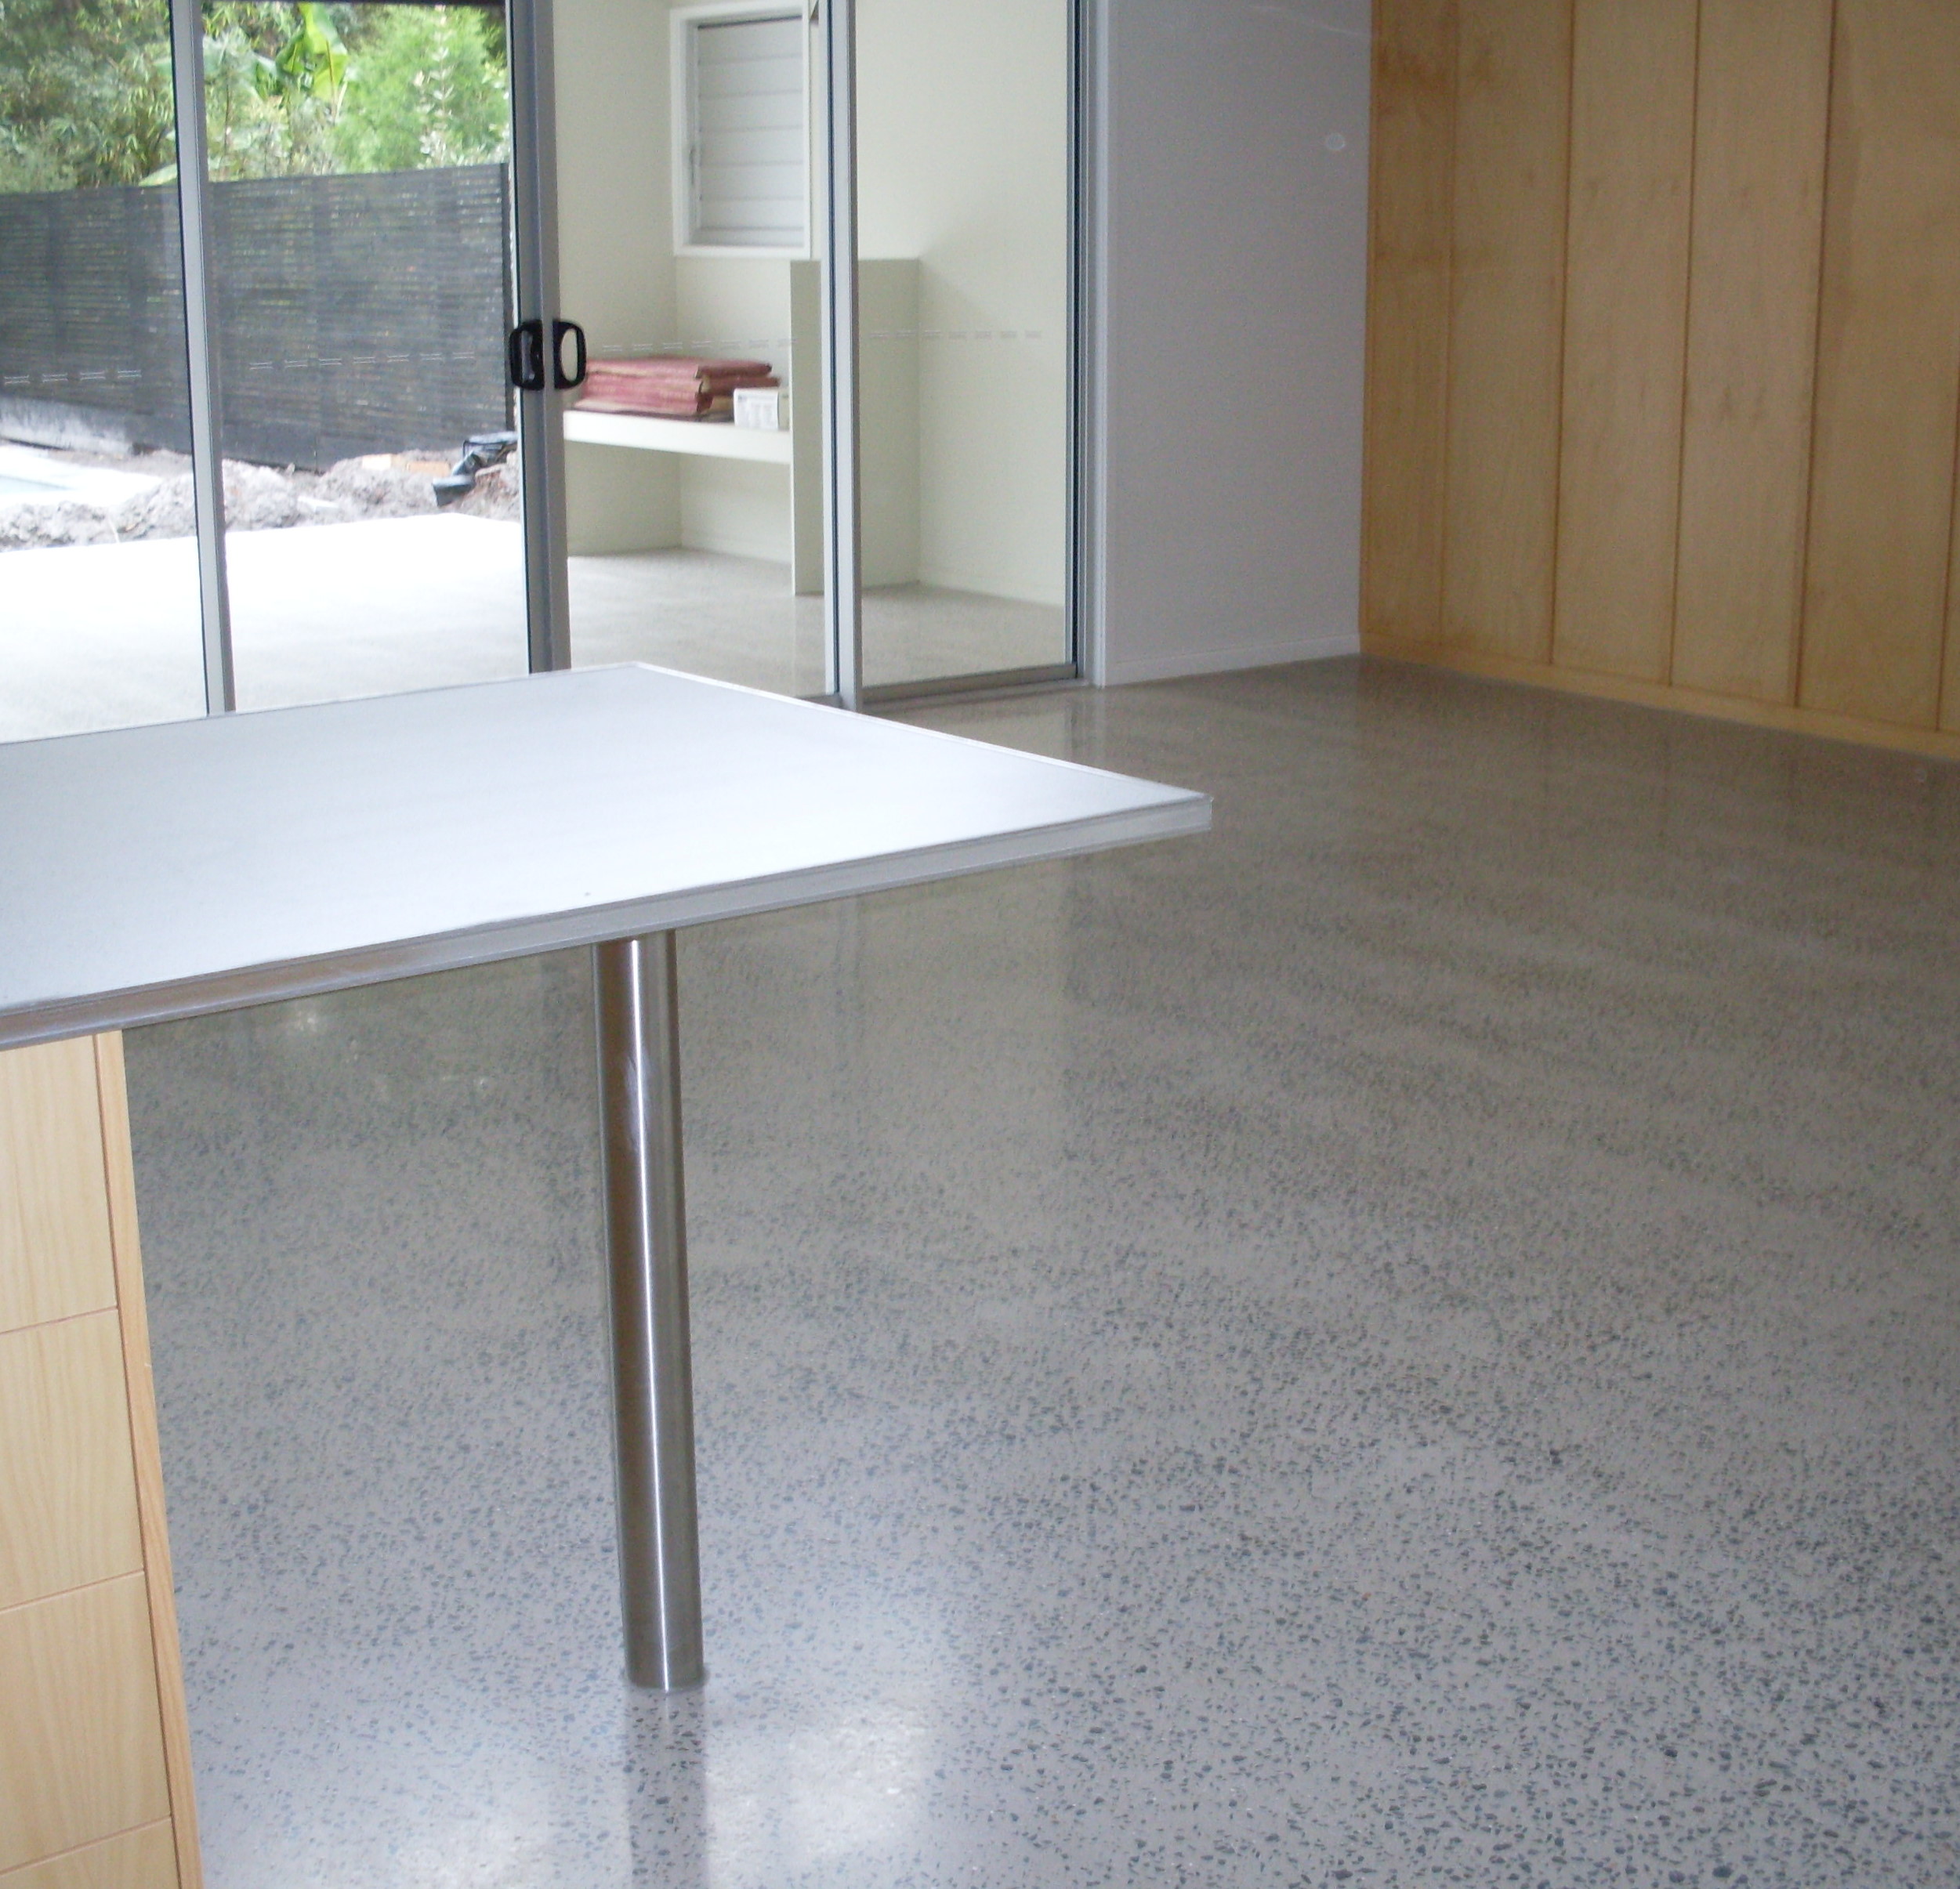 Meeting Safety Standards: Advantages of Epoxy Flooring in Commercial Kitchens